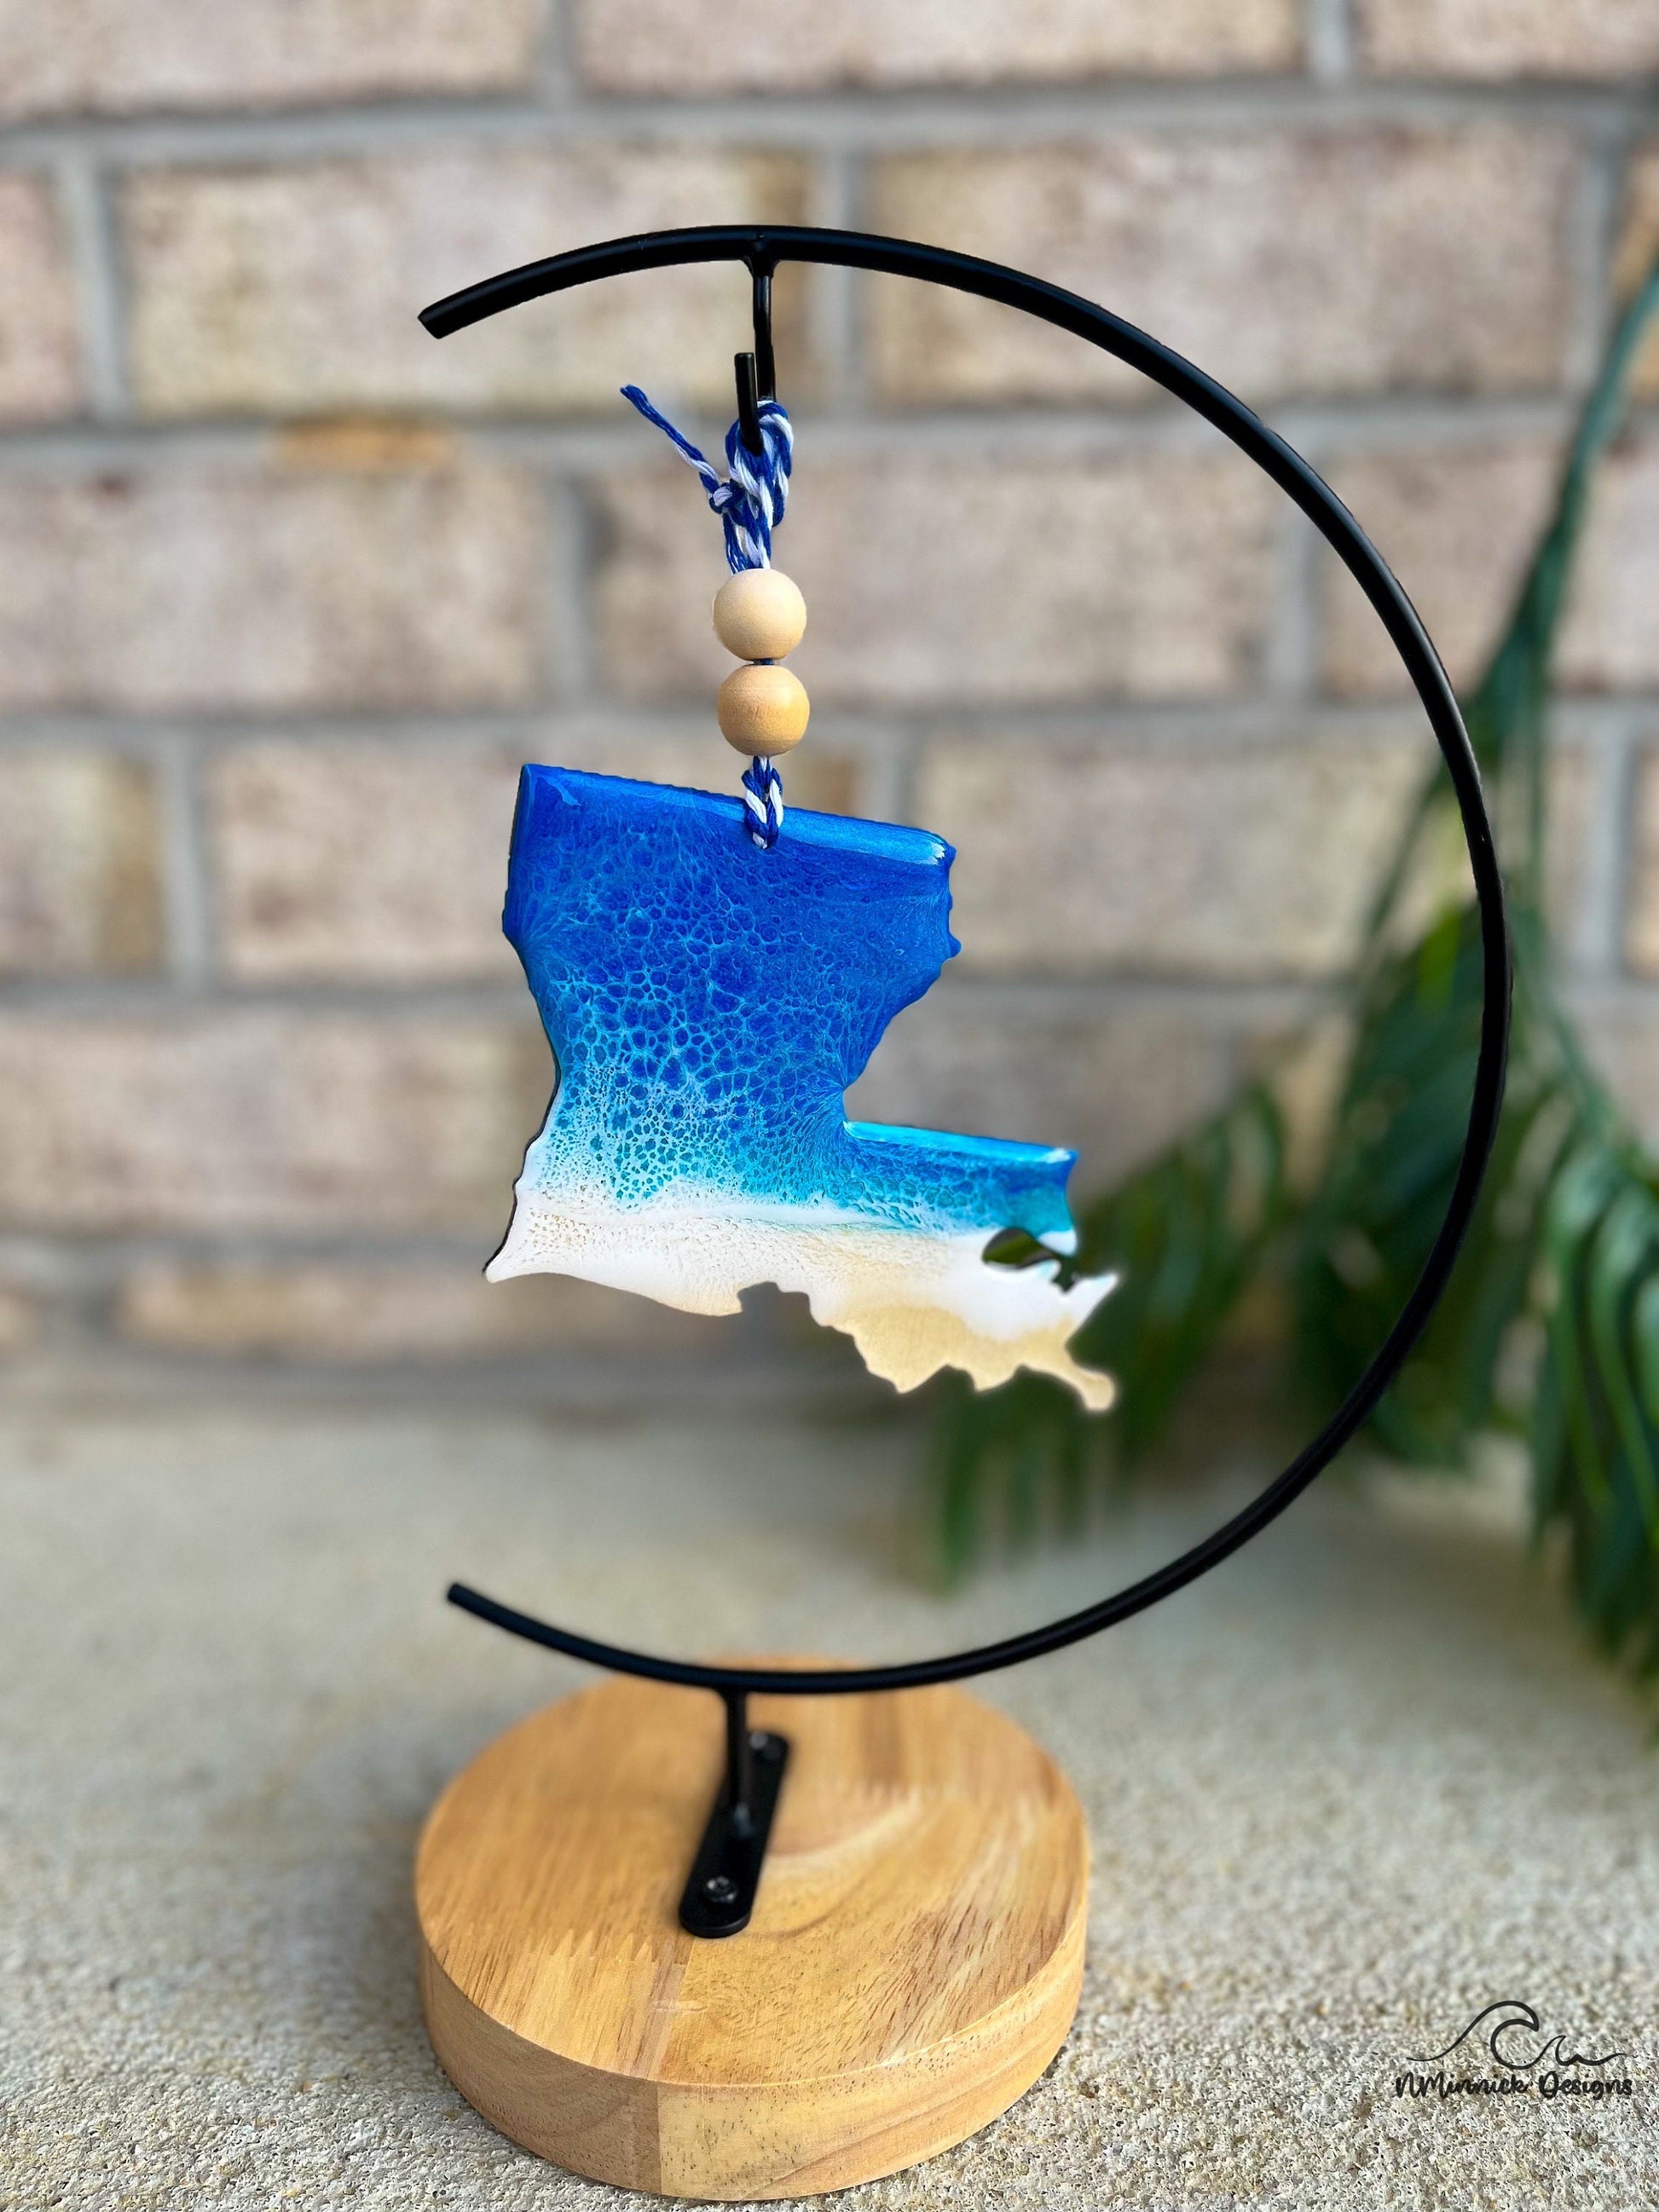 Louisiana coastal ornament with ocean wave art hanging from an ornament stand.